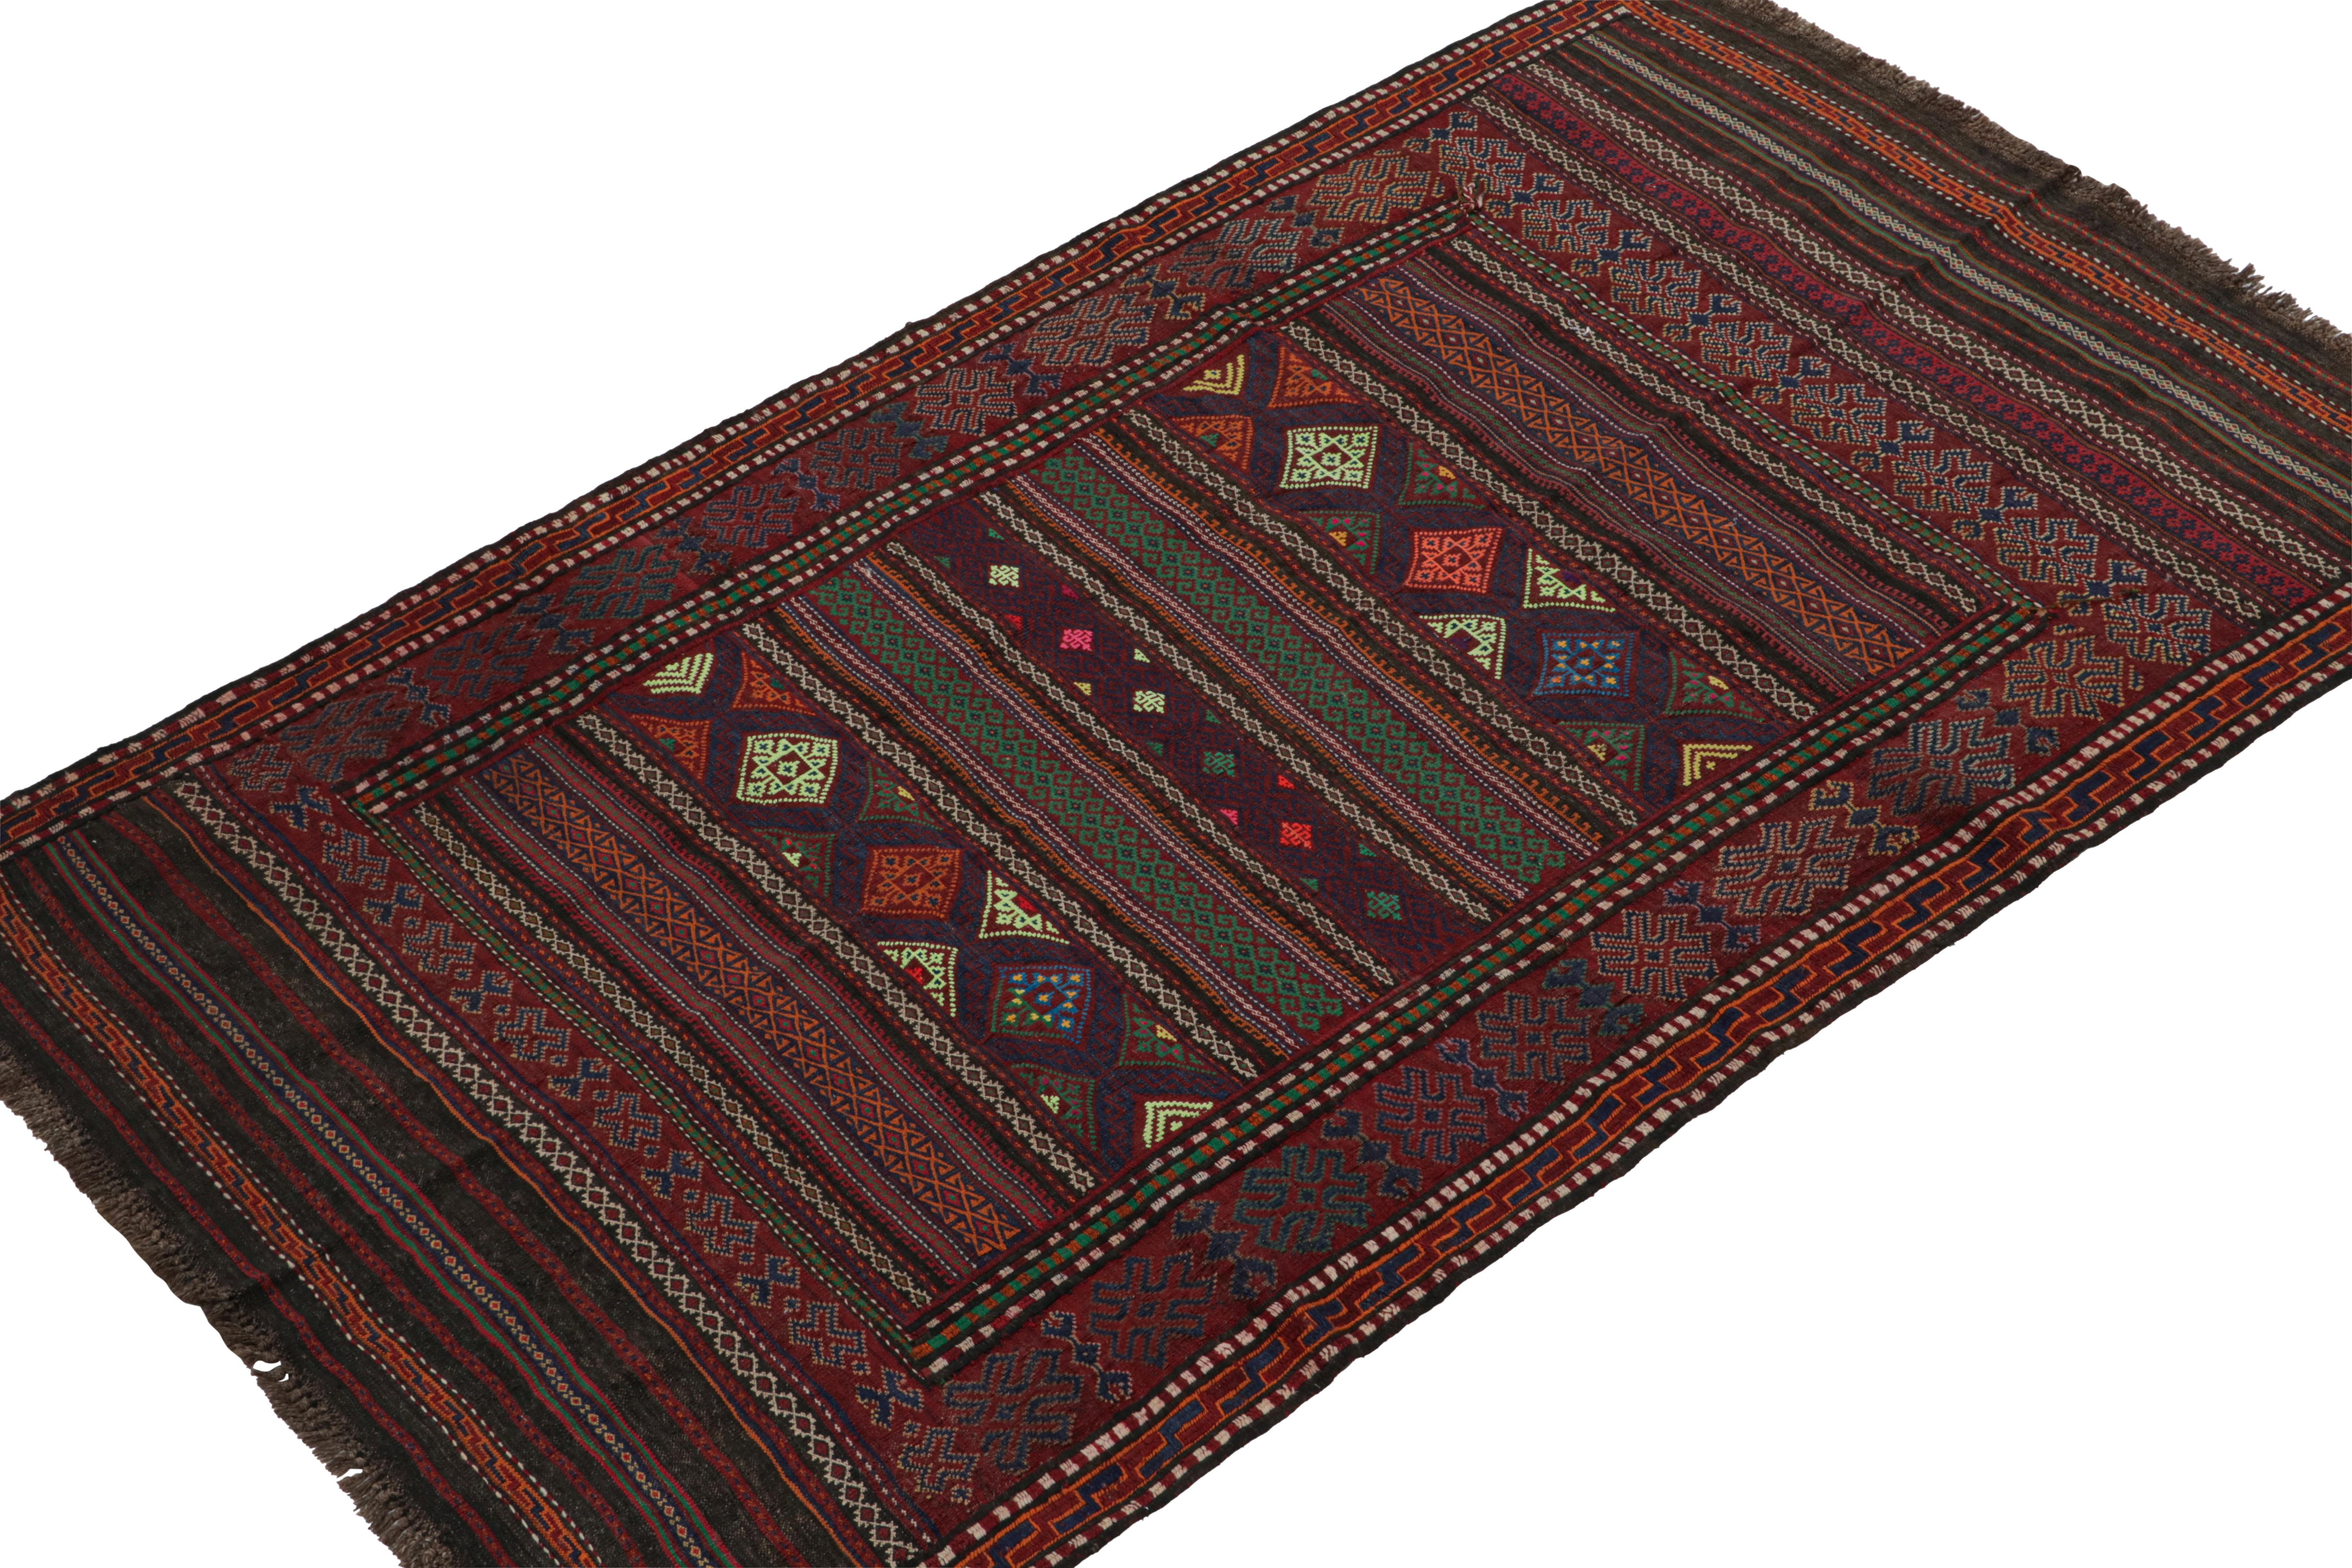 Handwoven in wool circa 1950-1960, this 4x7 vintage Baluch Kilim is a new curation from Rug & Kilim’s primitivist flatweaves. 

On the Design:

Specifically believed to originate from the Leghari clan of the Baluch tribe, this tribal rug boasts a